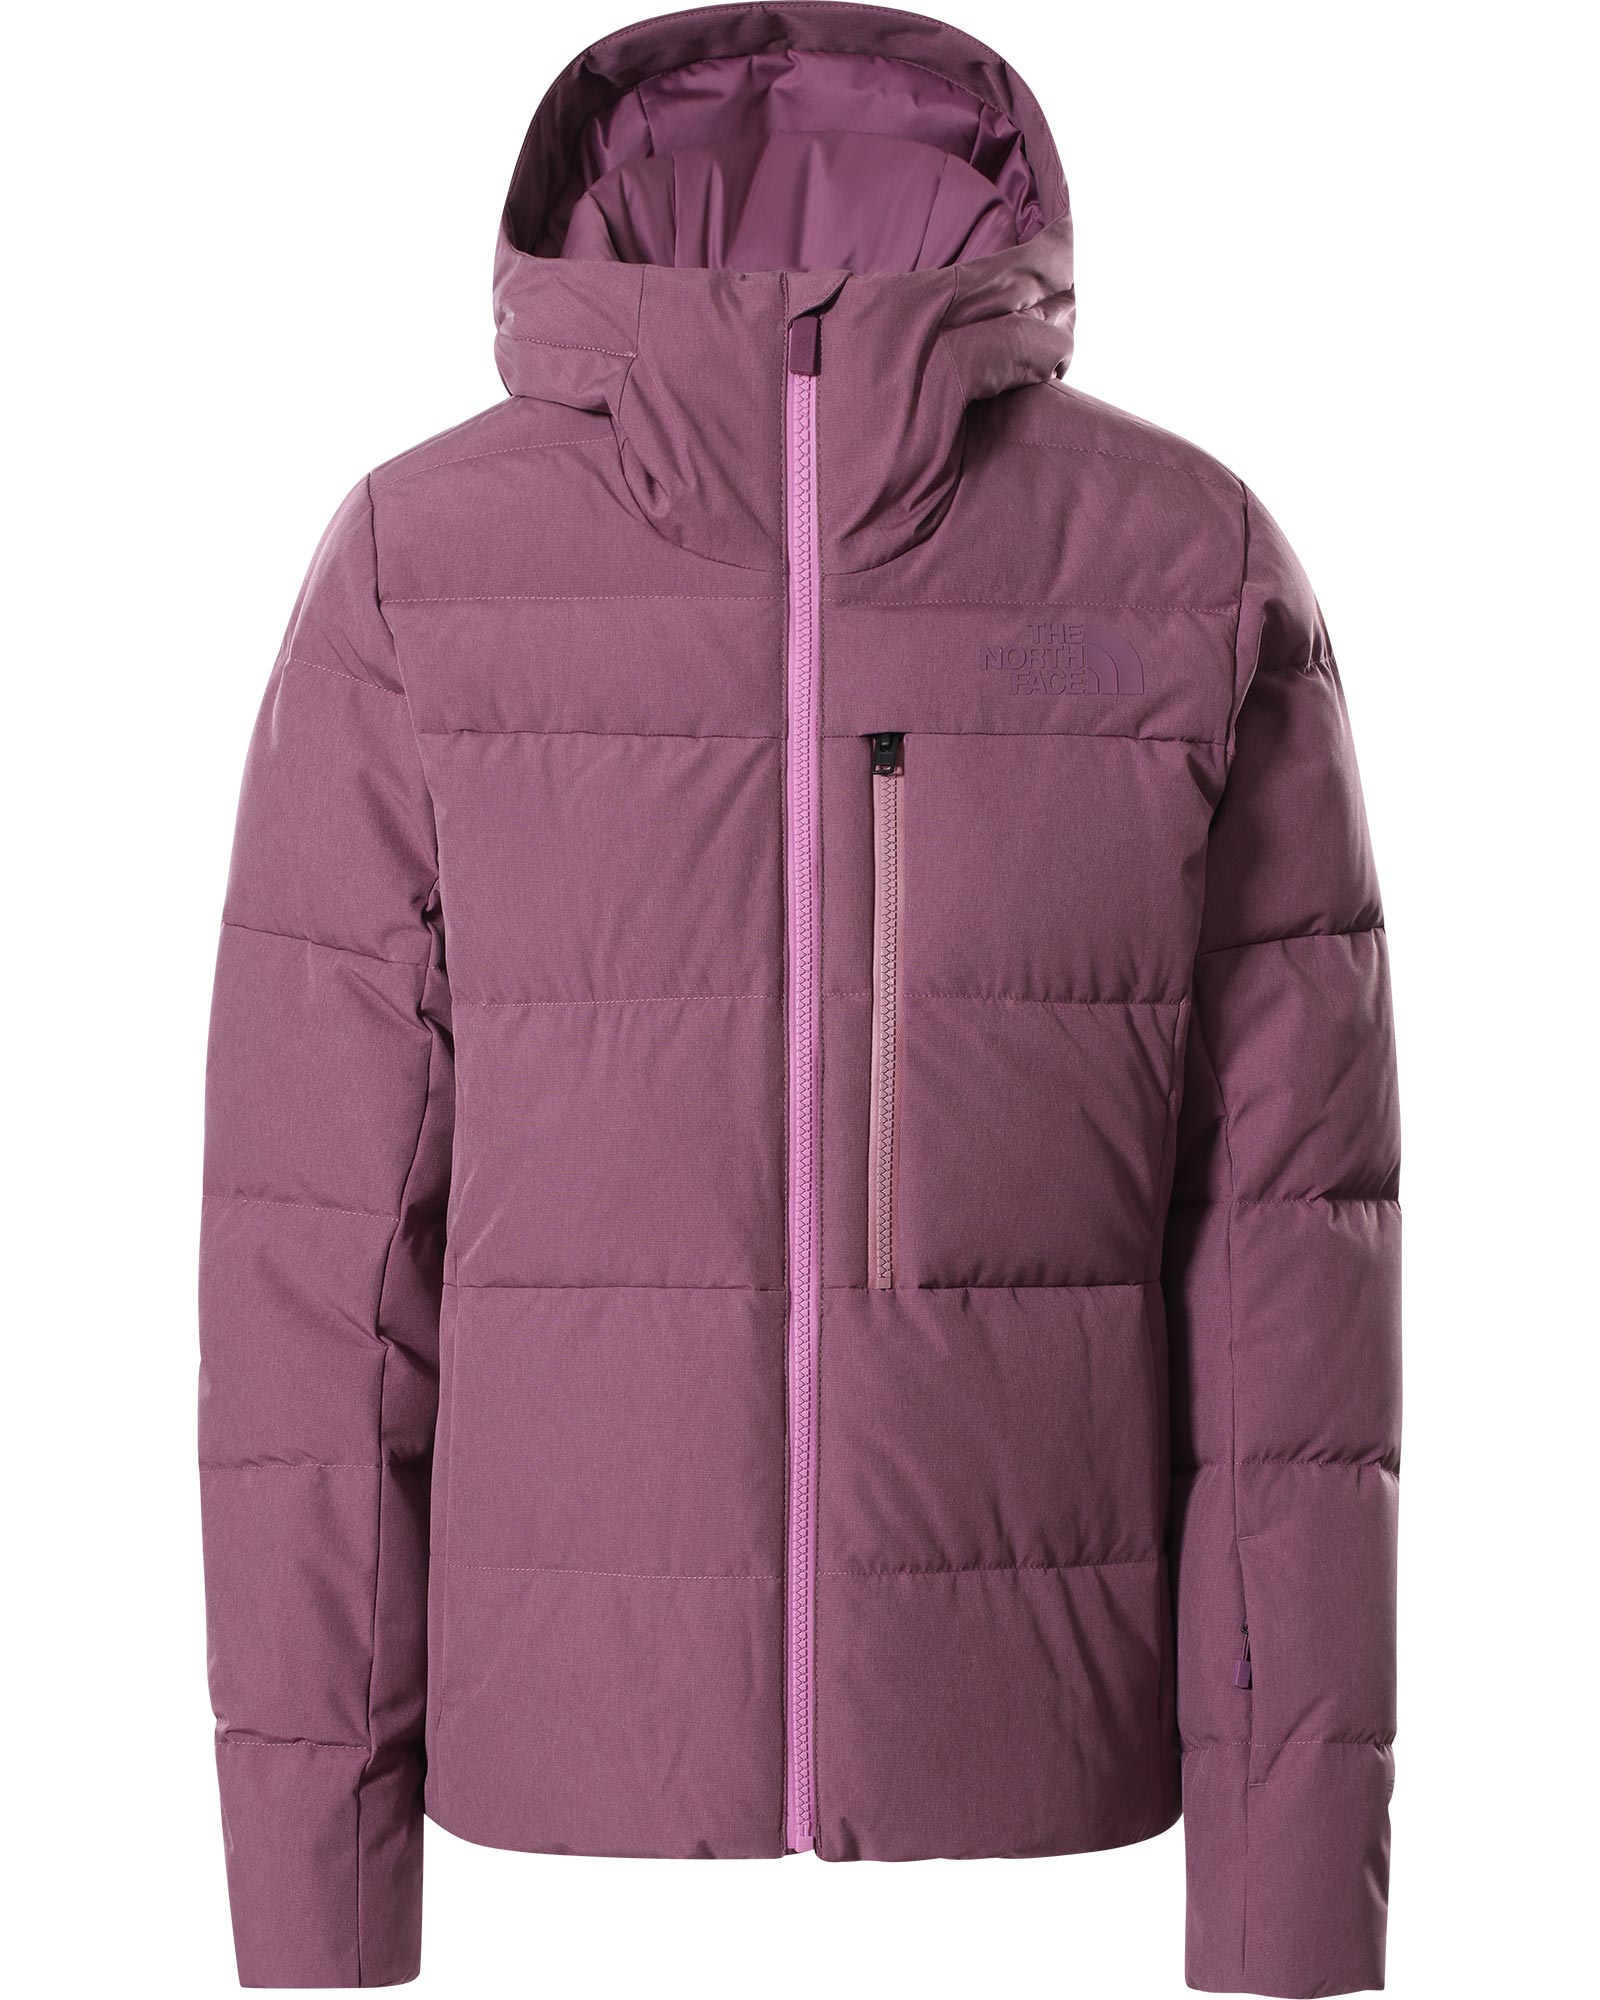 The North Face Heavenly Down Women’s Jacket - Pikes Purple Heather S